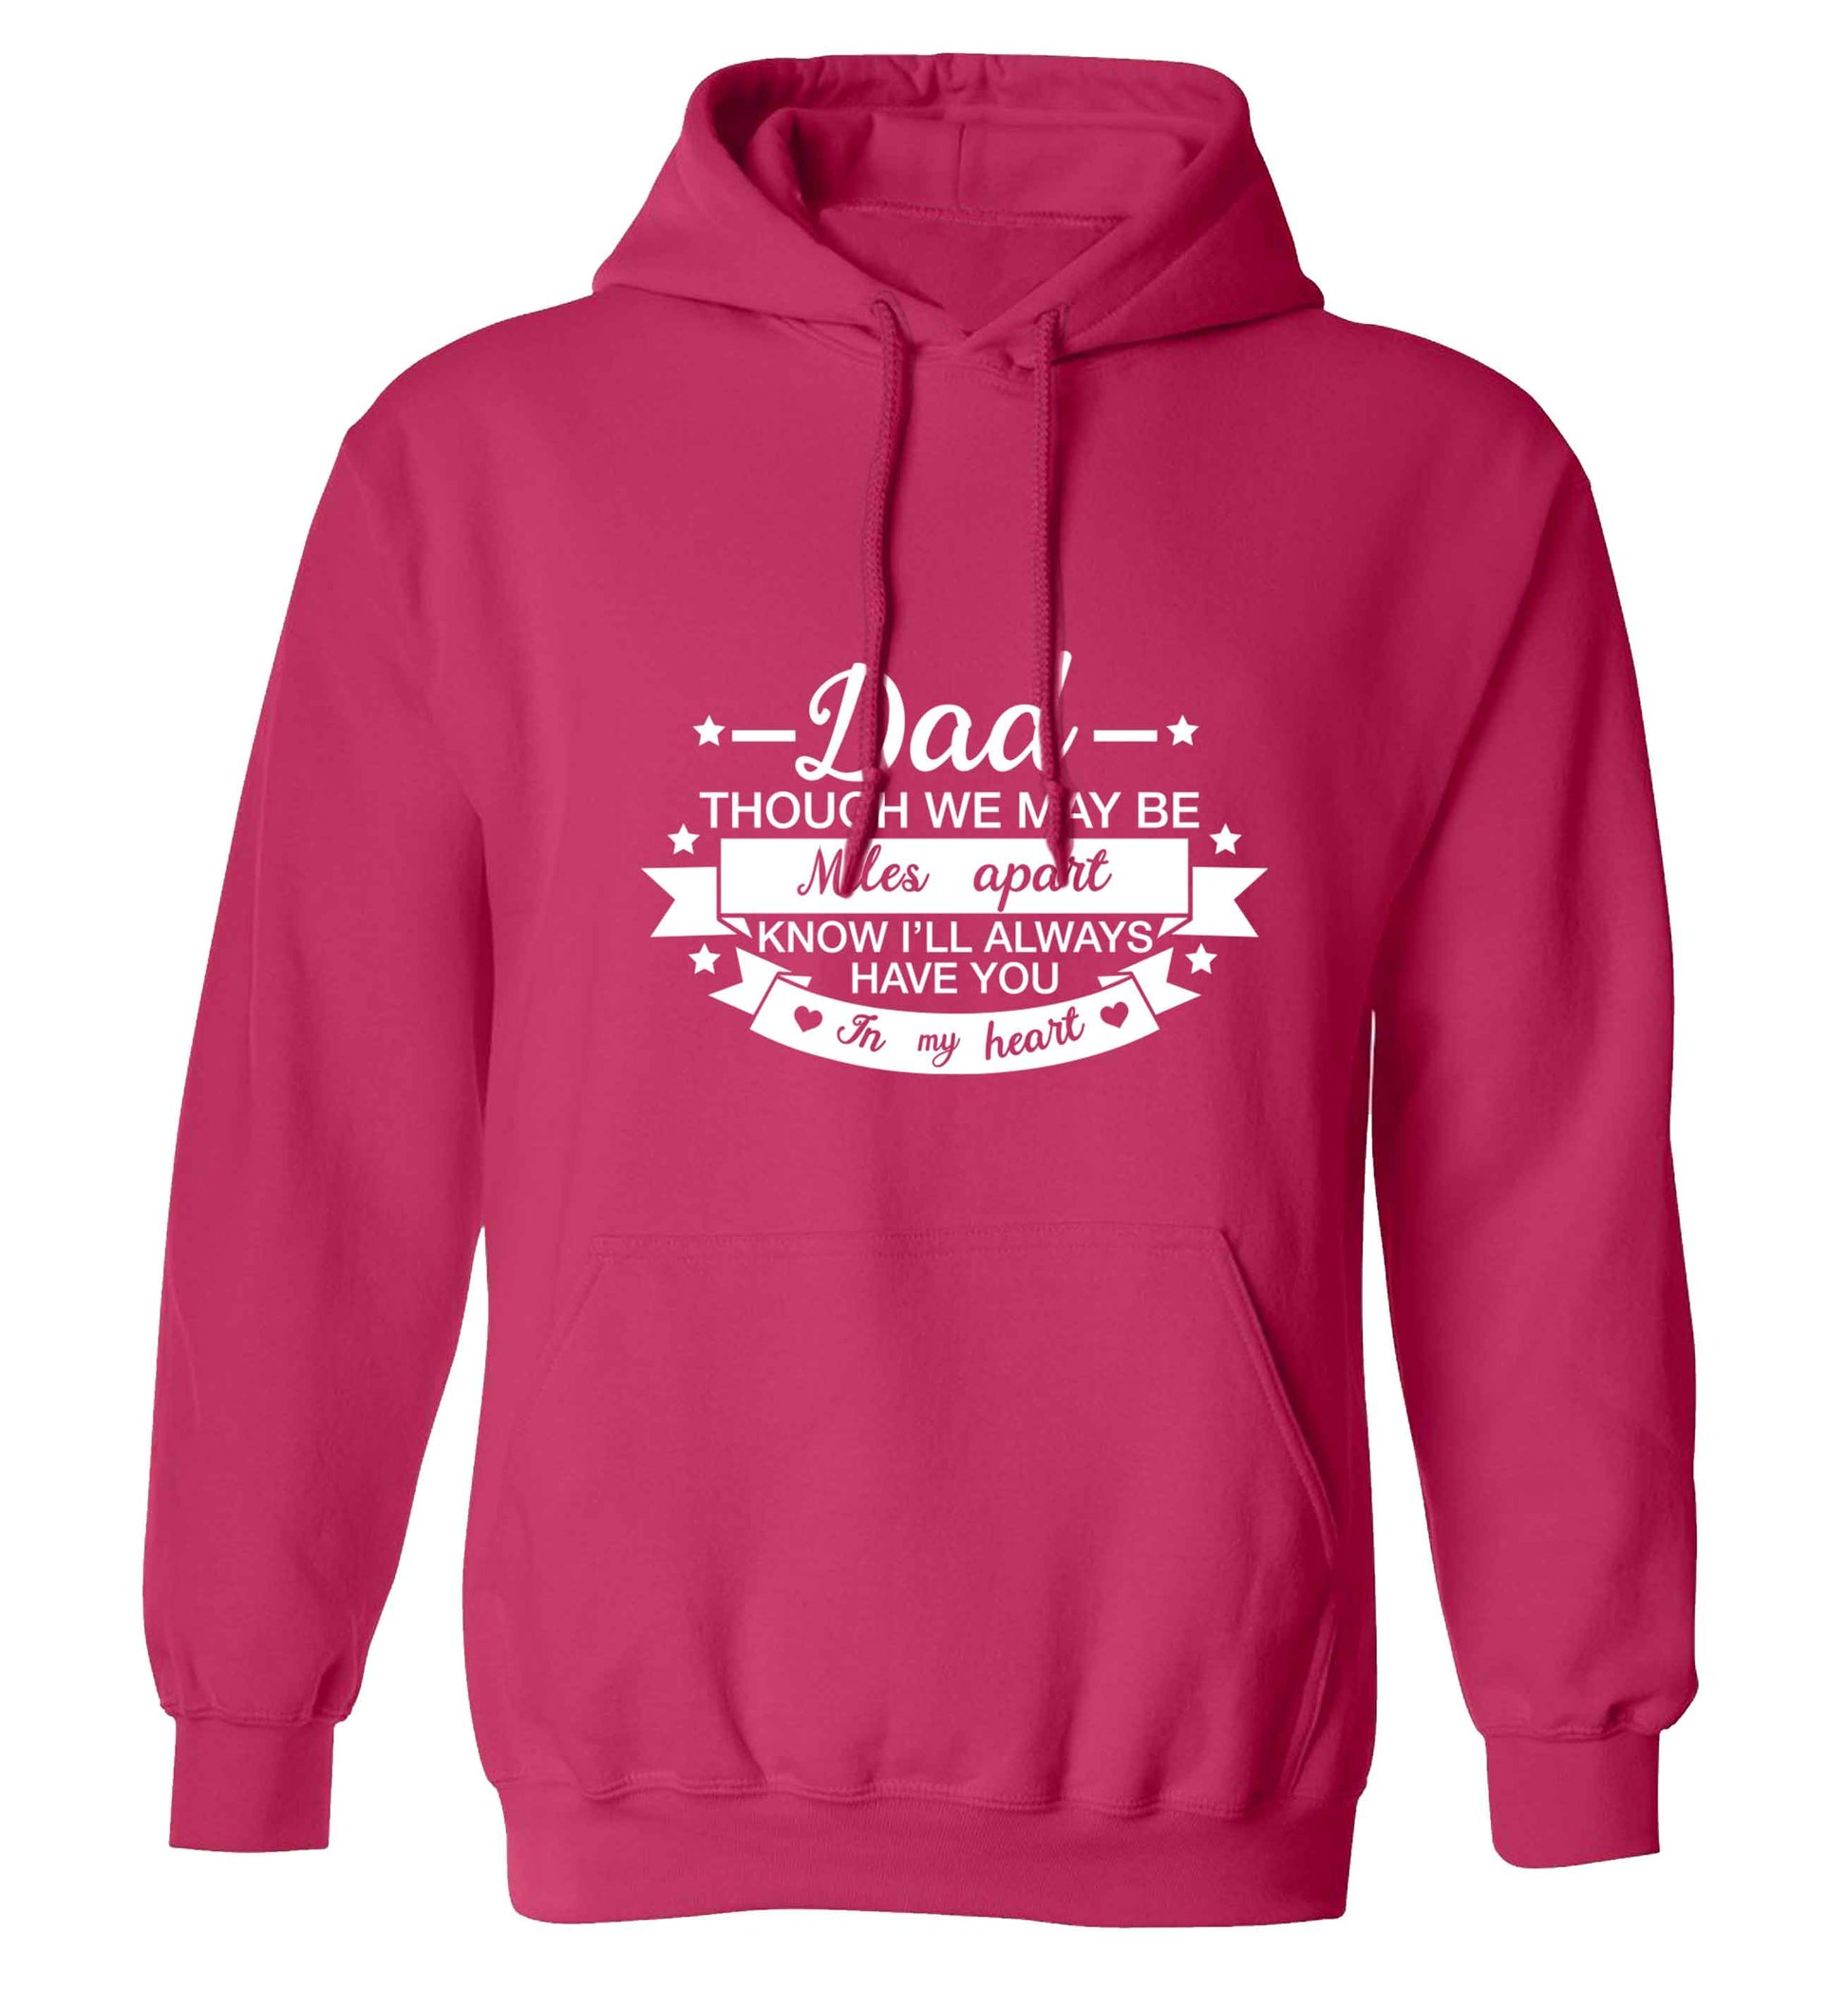 Dad though we are miles apart know I'll always have you in my heart adults unisex pink hoodie 2XL